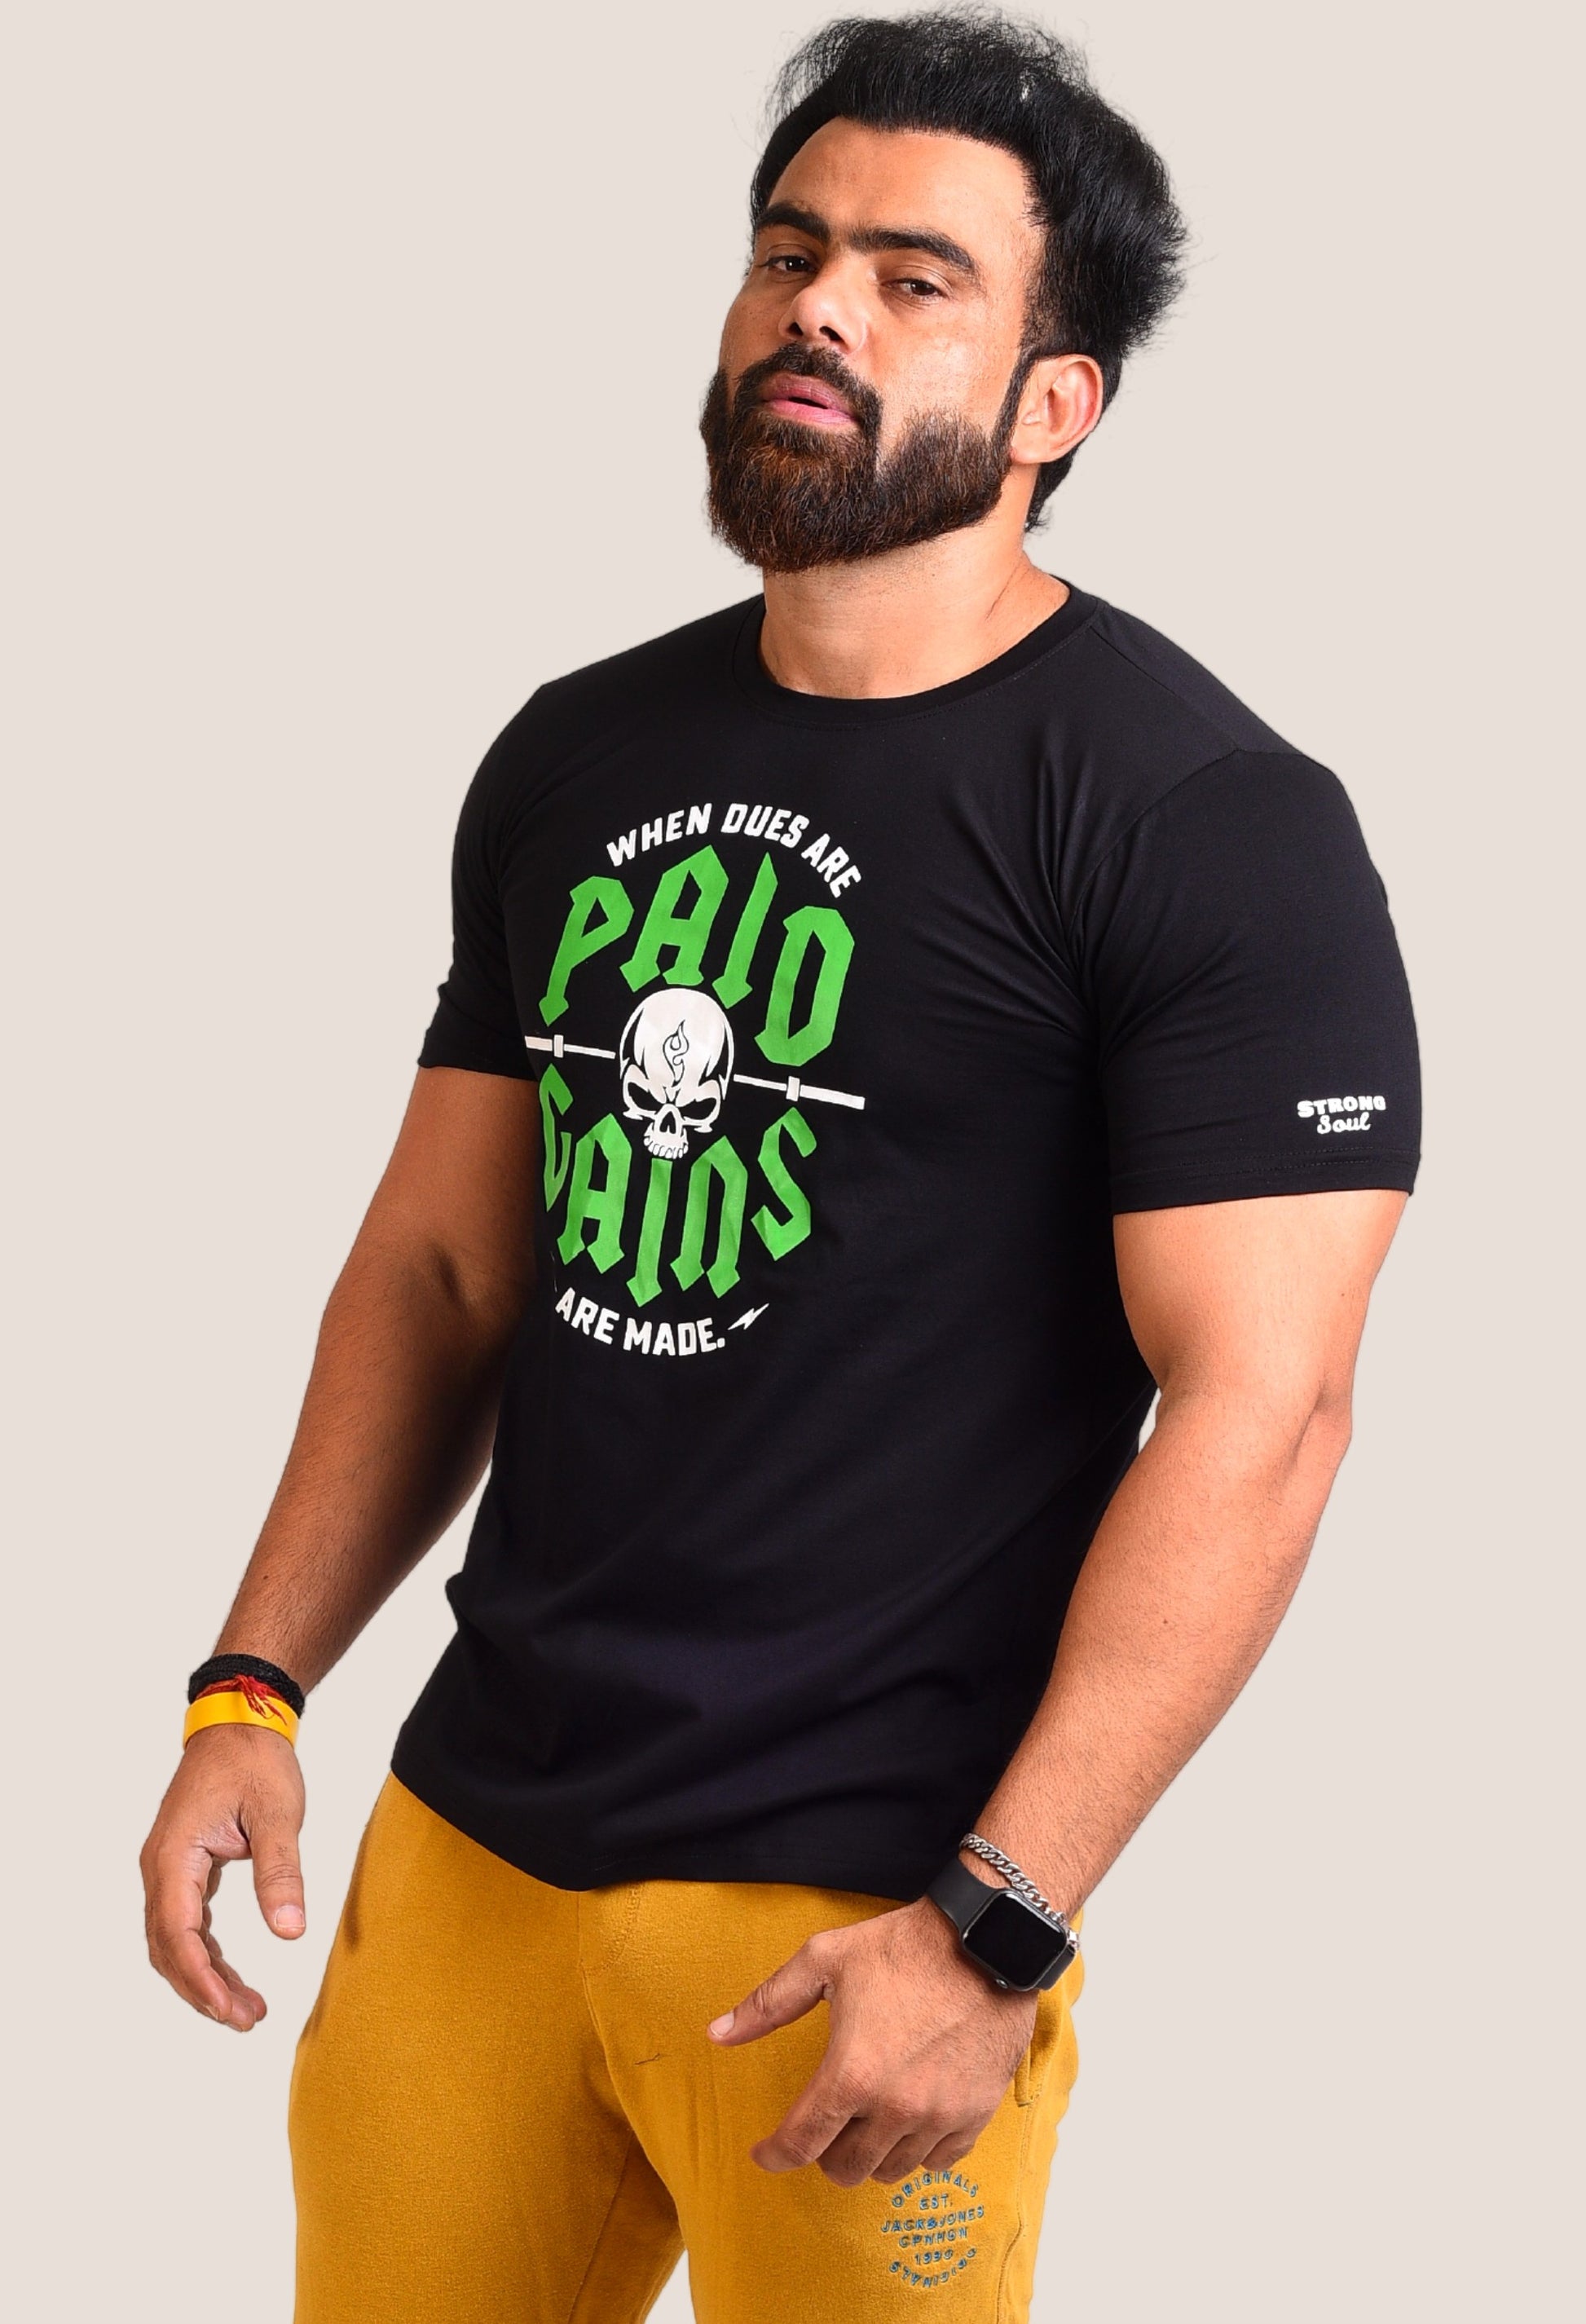 Gym T Shirt - When Dues Are Paid Gains Are Made with premium cotton Lycra. The Sports T Shirt by Strong Soul